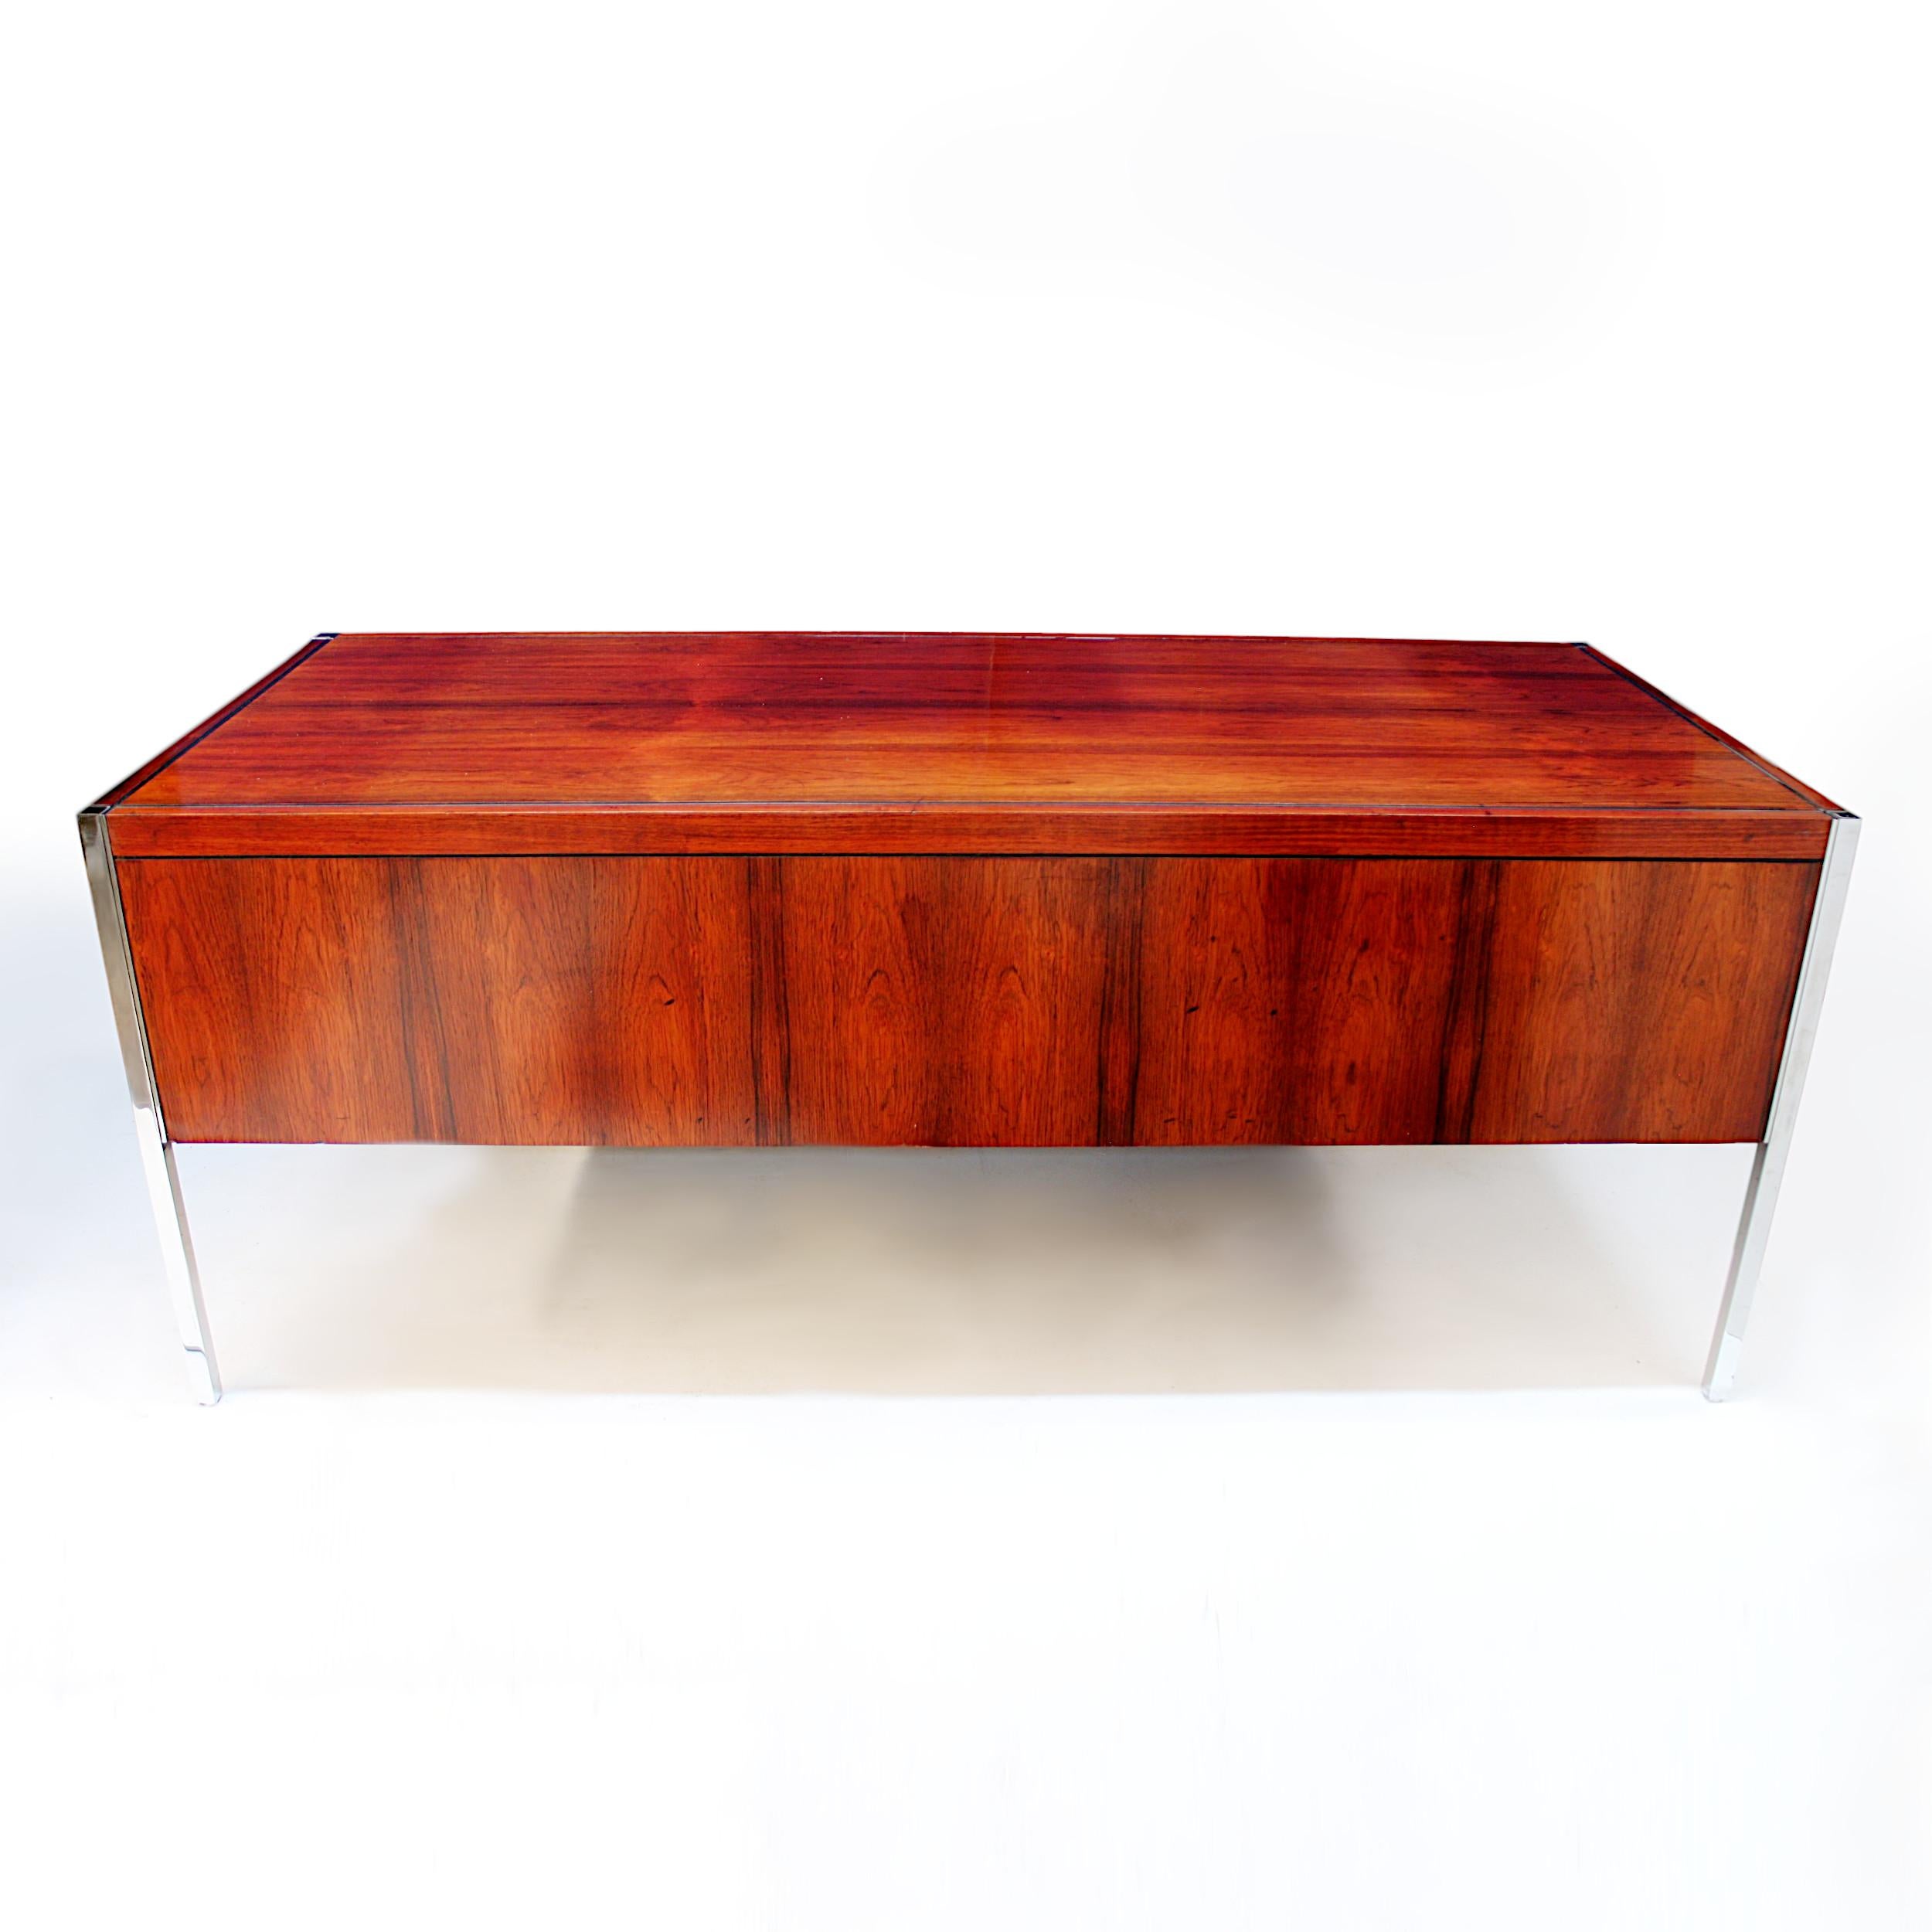 Late 20th Century 1970s Mid-Century Modern Rosewood Executive Desk by Richard Schultz for Knoll